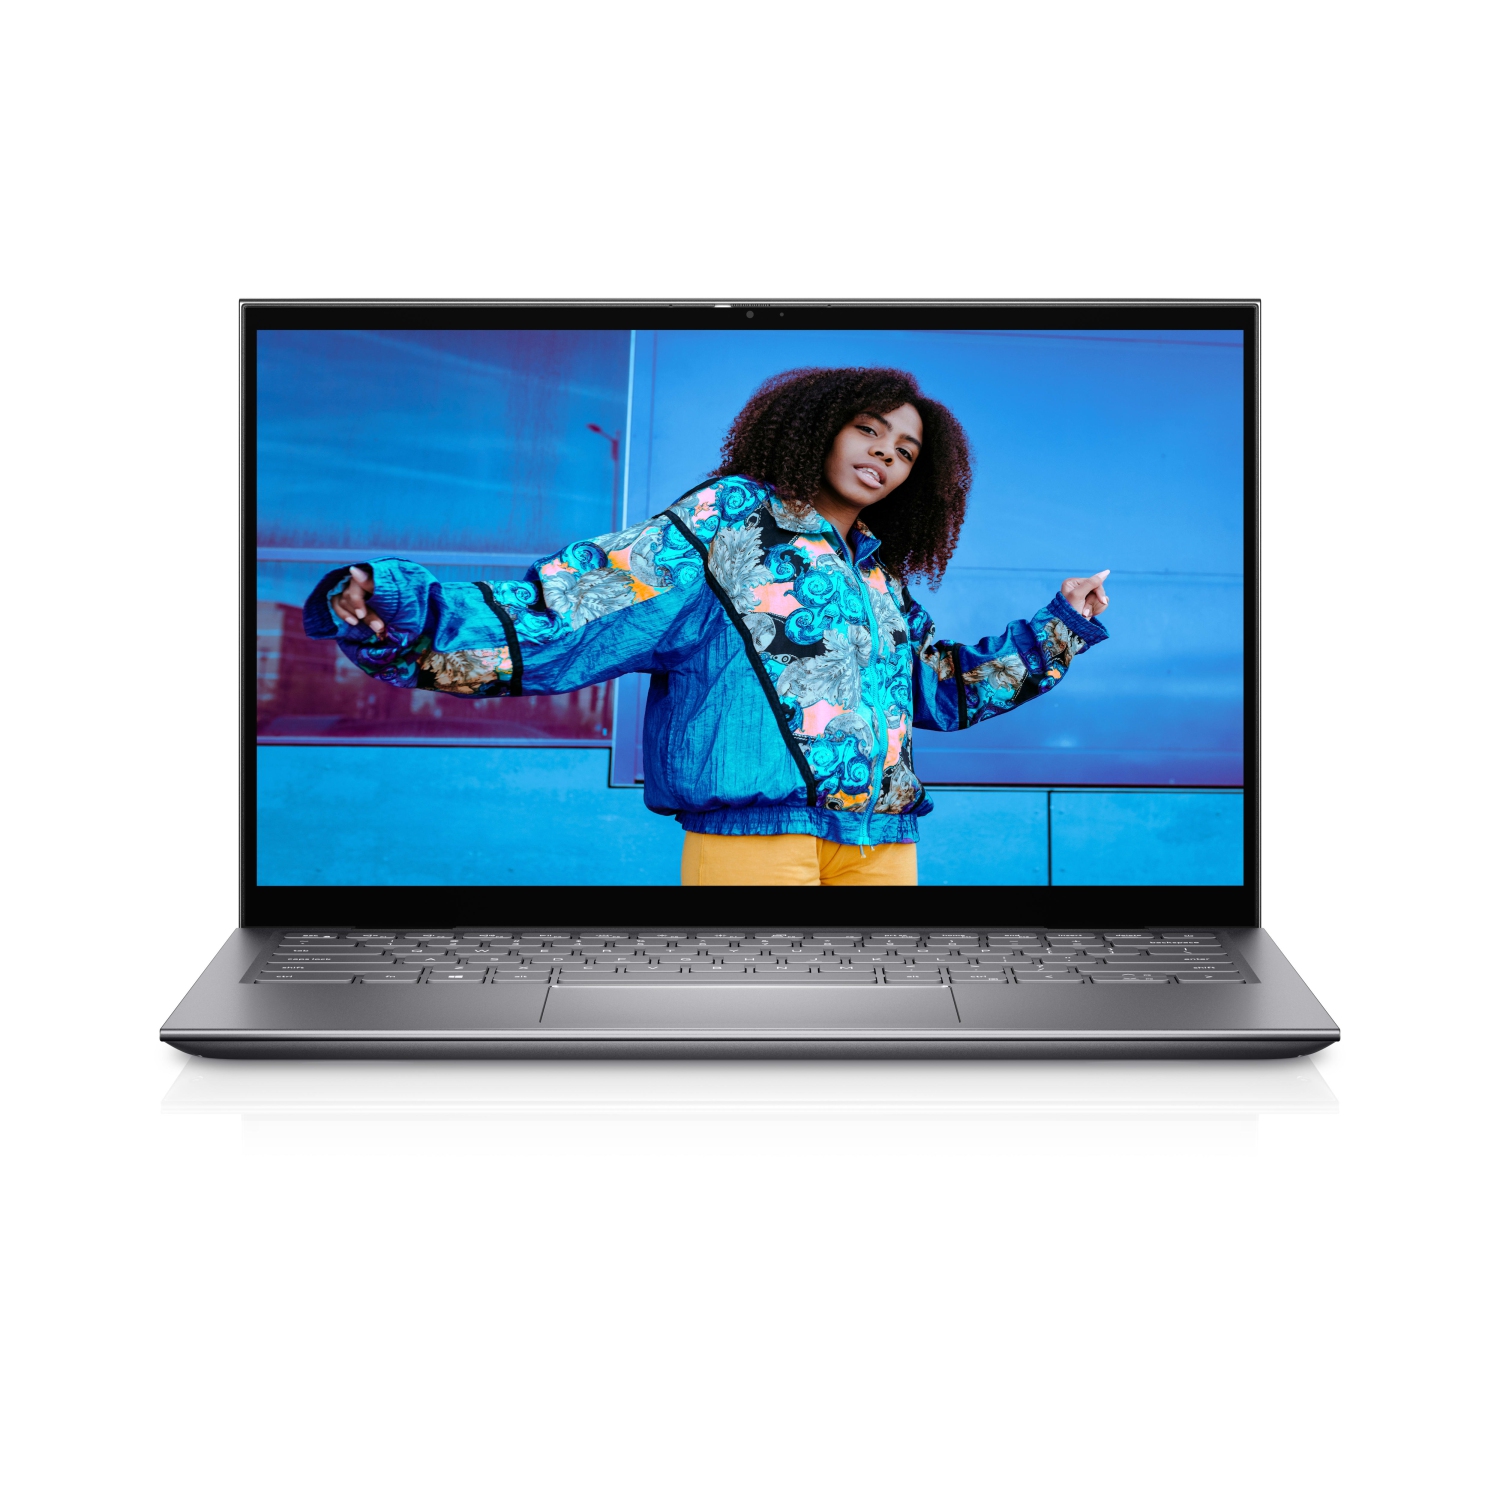 Refurbished (Excellent) – Dell Inspiron 5410 2-in-1 (2021) | 14" FHD Touch | Core i5 - 2TB SSD - 32GB RAM | 4 Cores @ 4.5 GHz - 11th Gen CPU